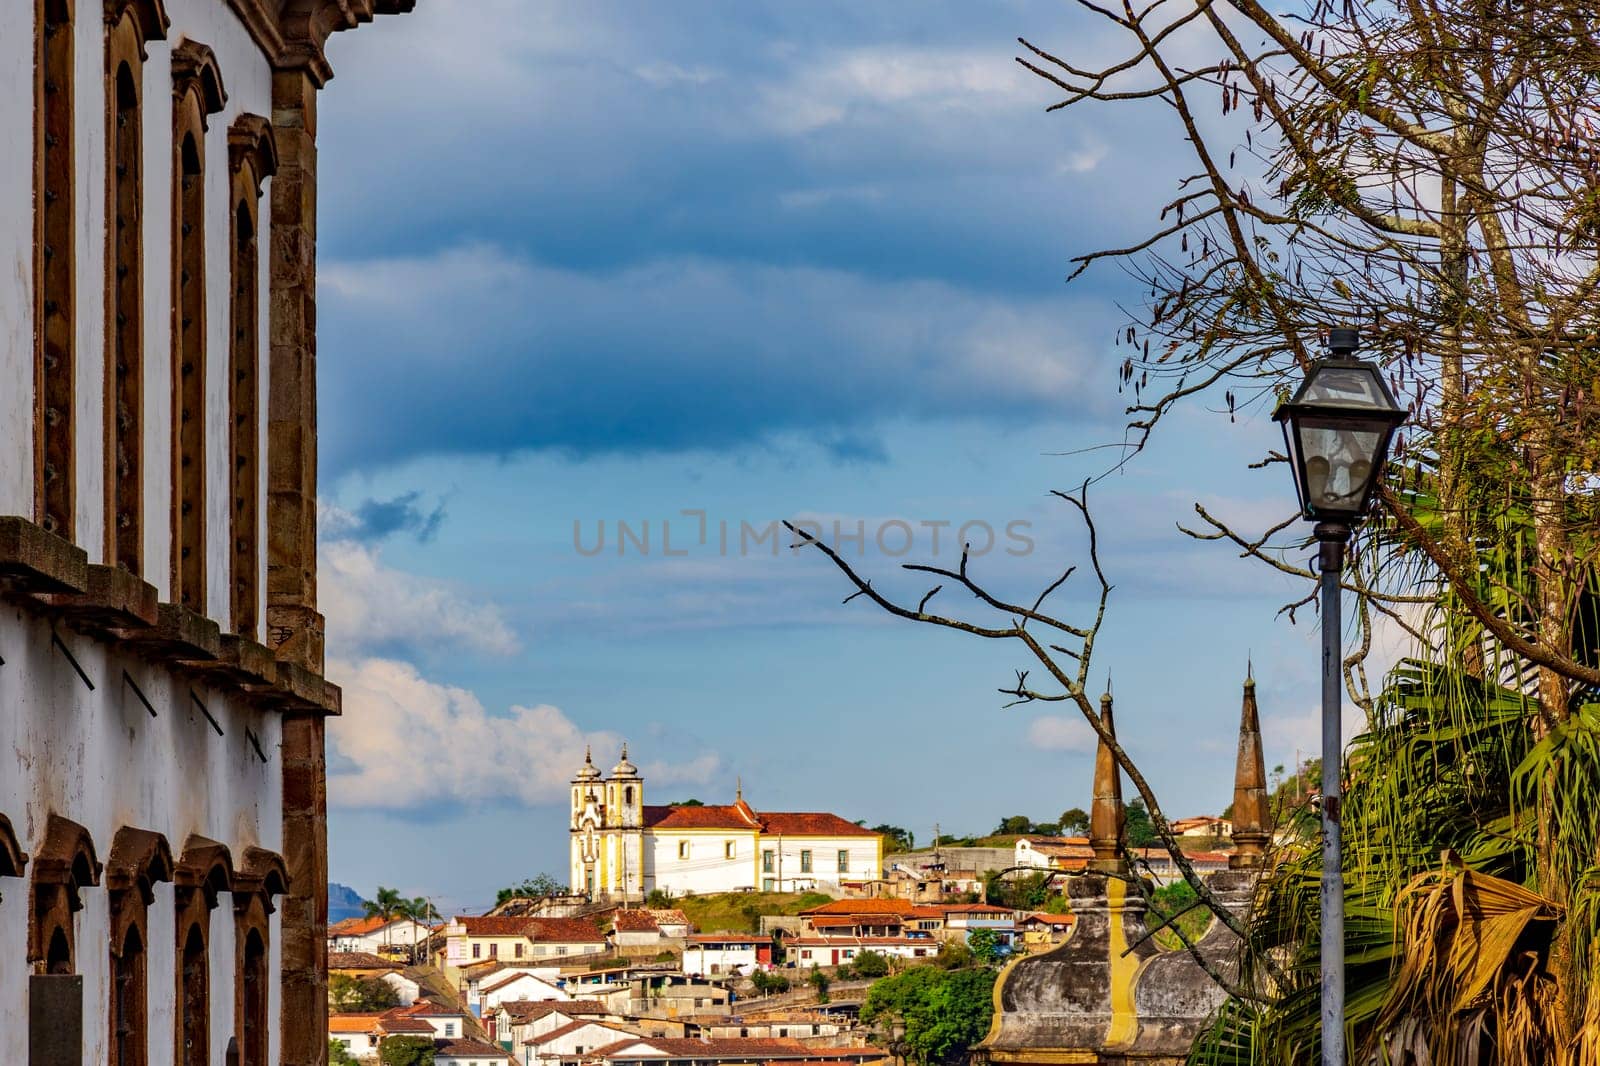 View of the historic city of Ouro Preto in Minas Gerais with its towers and churches